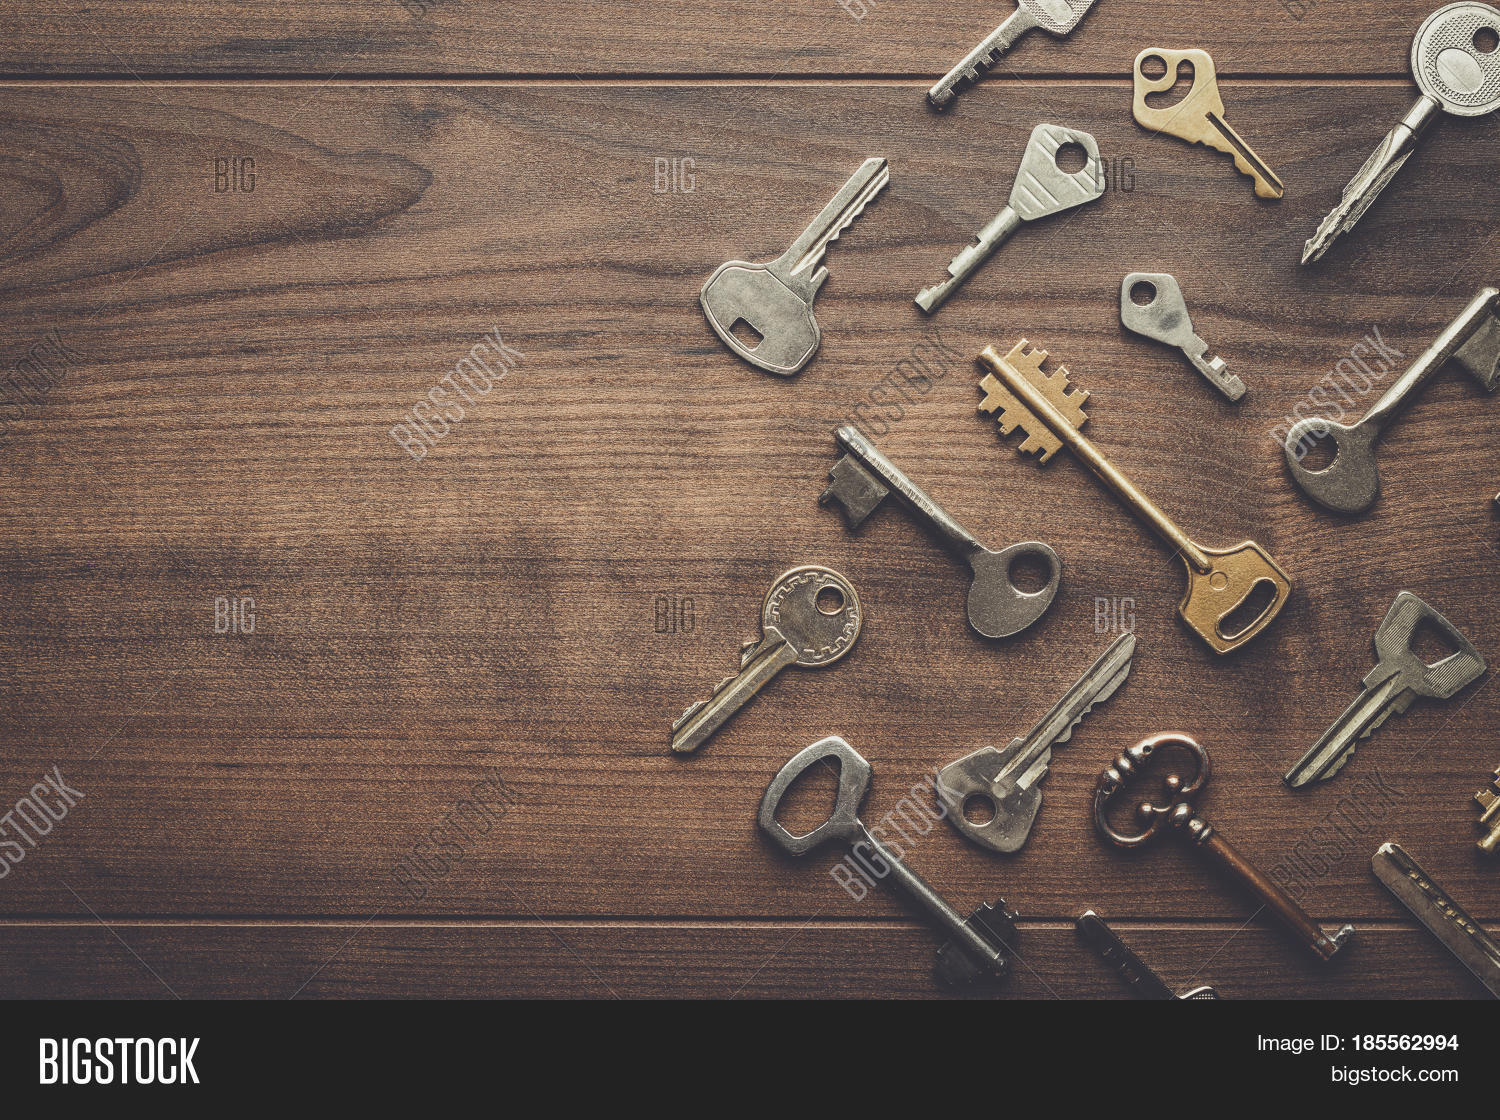 Many Different Keys On Image Photo Trial Bigstock